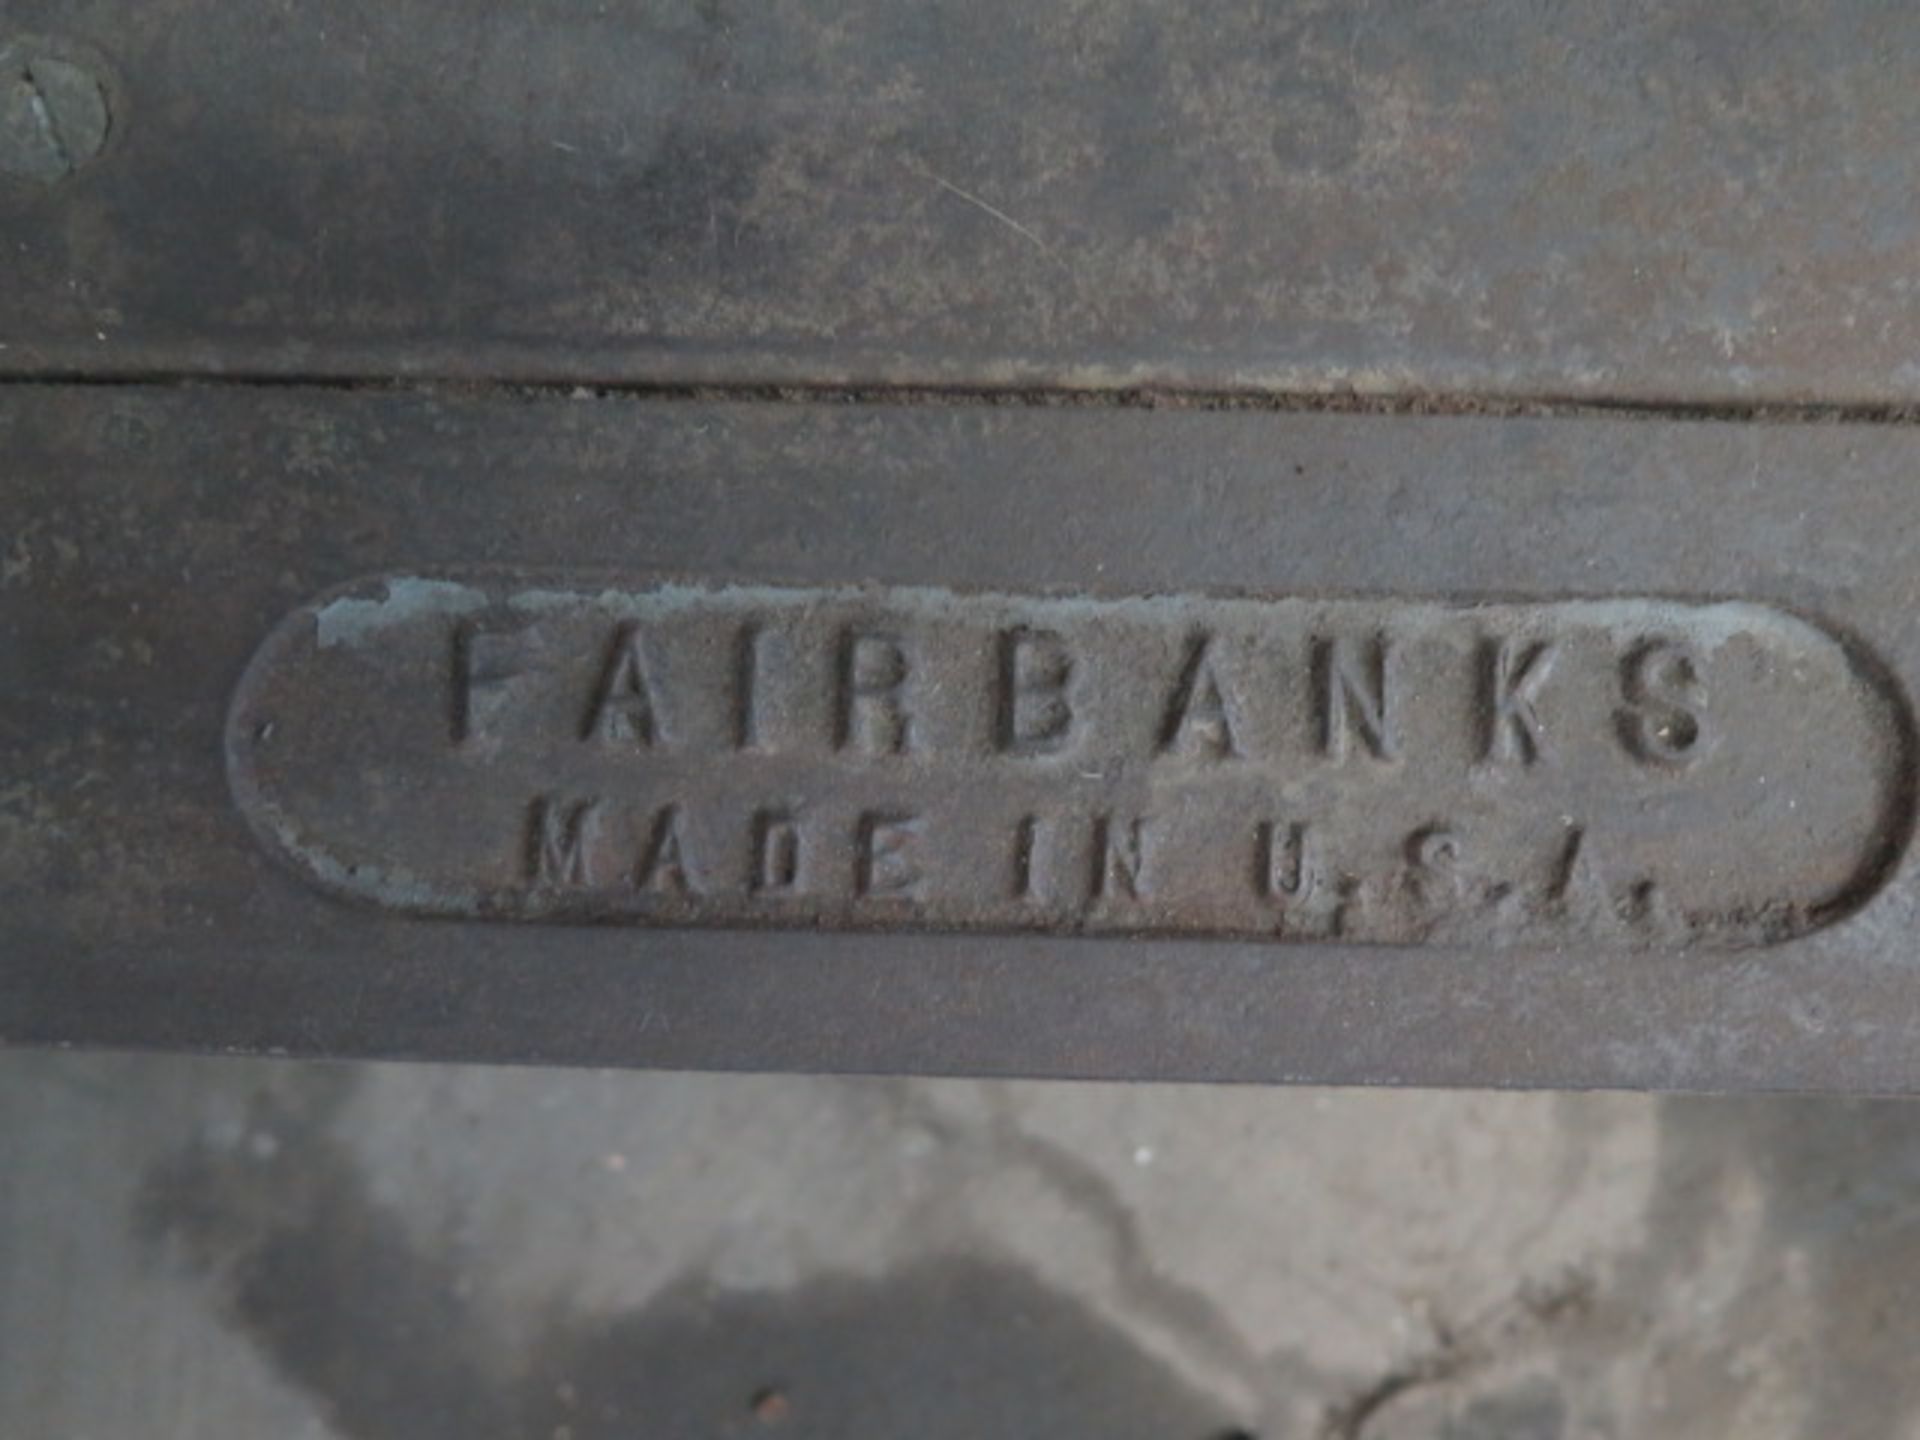 Fairbanks Shipping Scale - Image 3 of 3